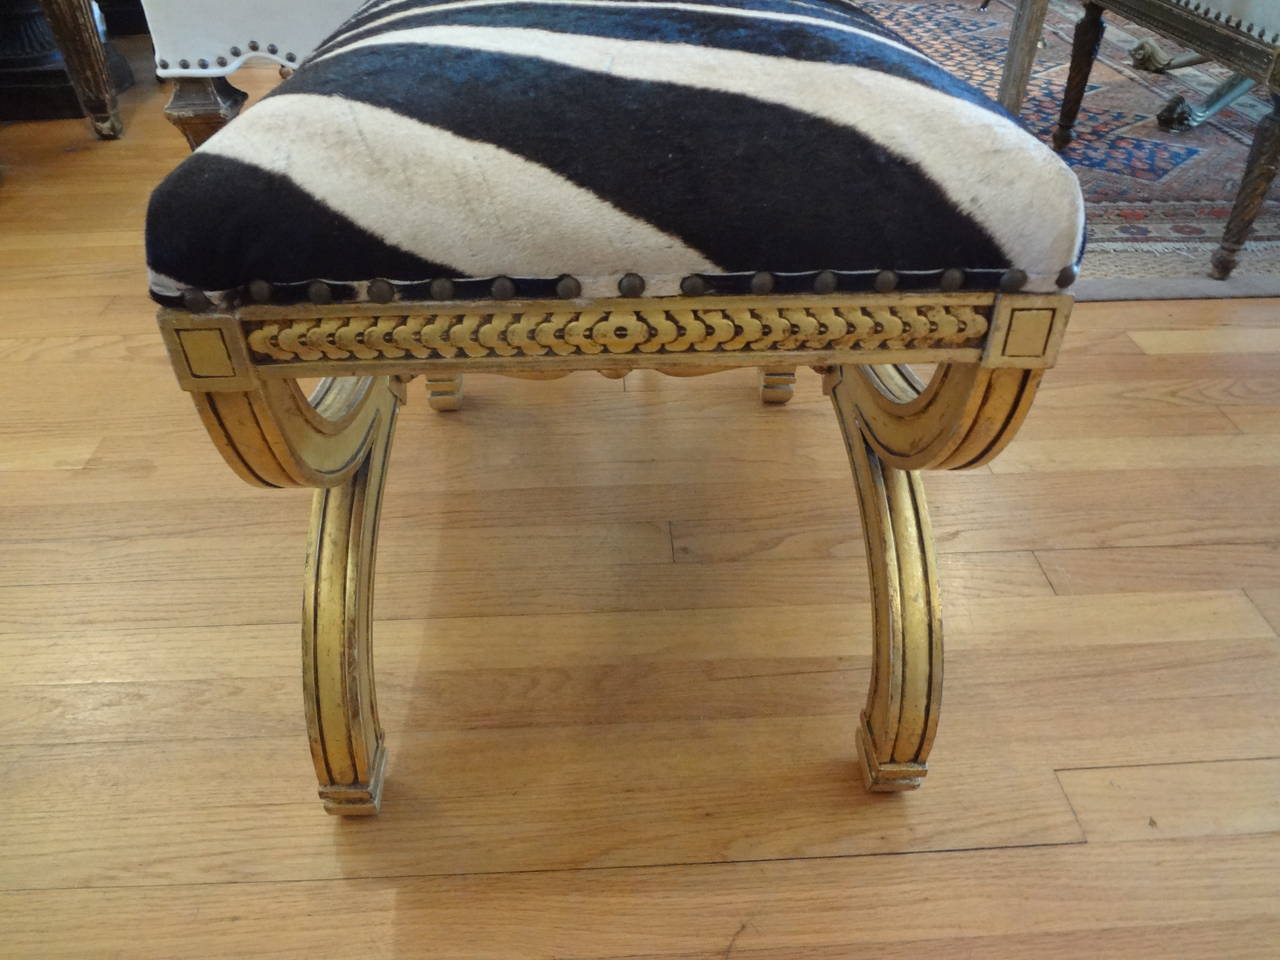 20th Century French Louis XVI Style Gilt Wood Stool Upholstered In Zebra Hide